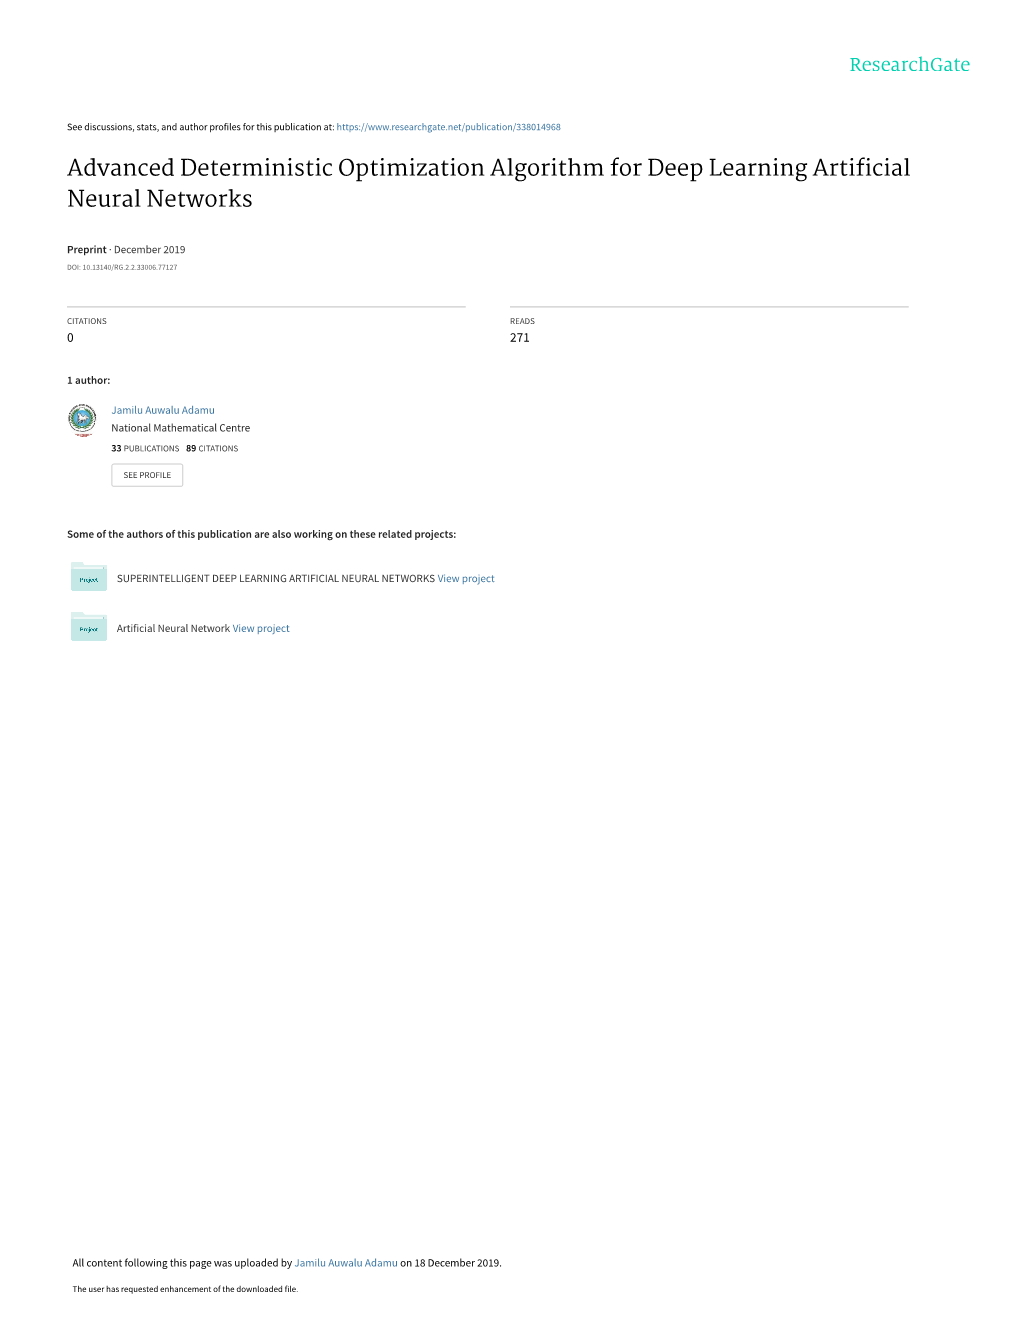 Advanced Deterministic Optimization Algorithm for Deep Learning Artiﬁcial Neural Networks